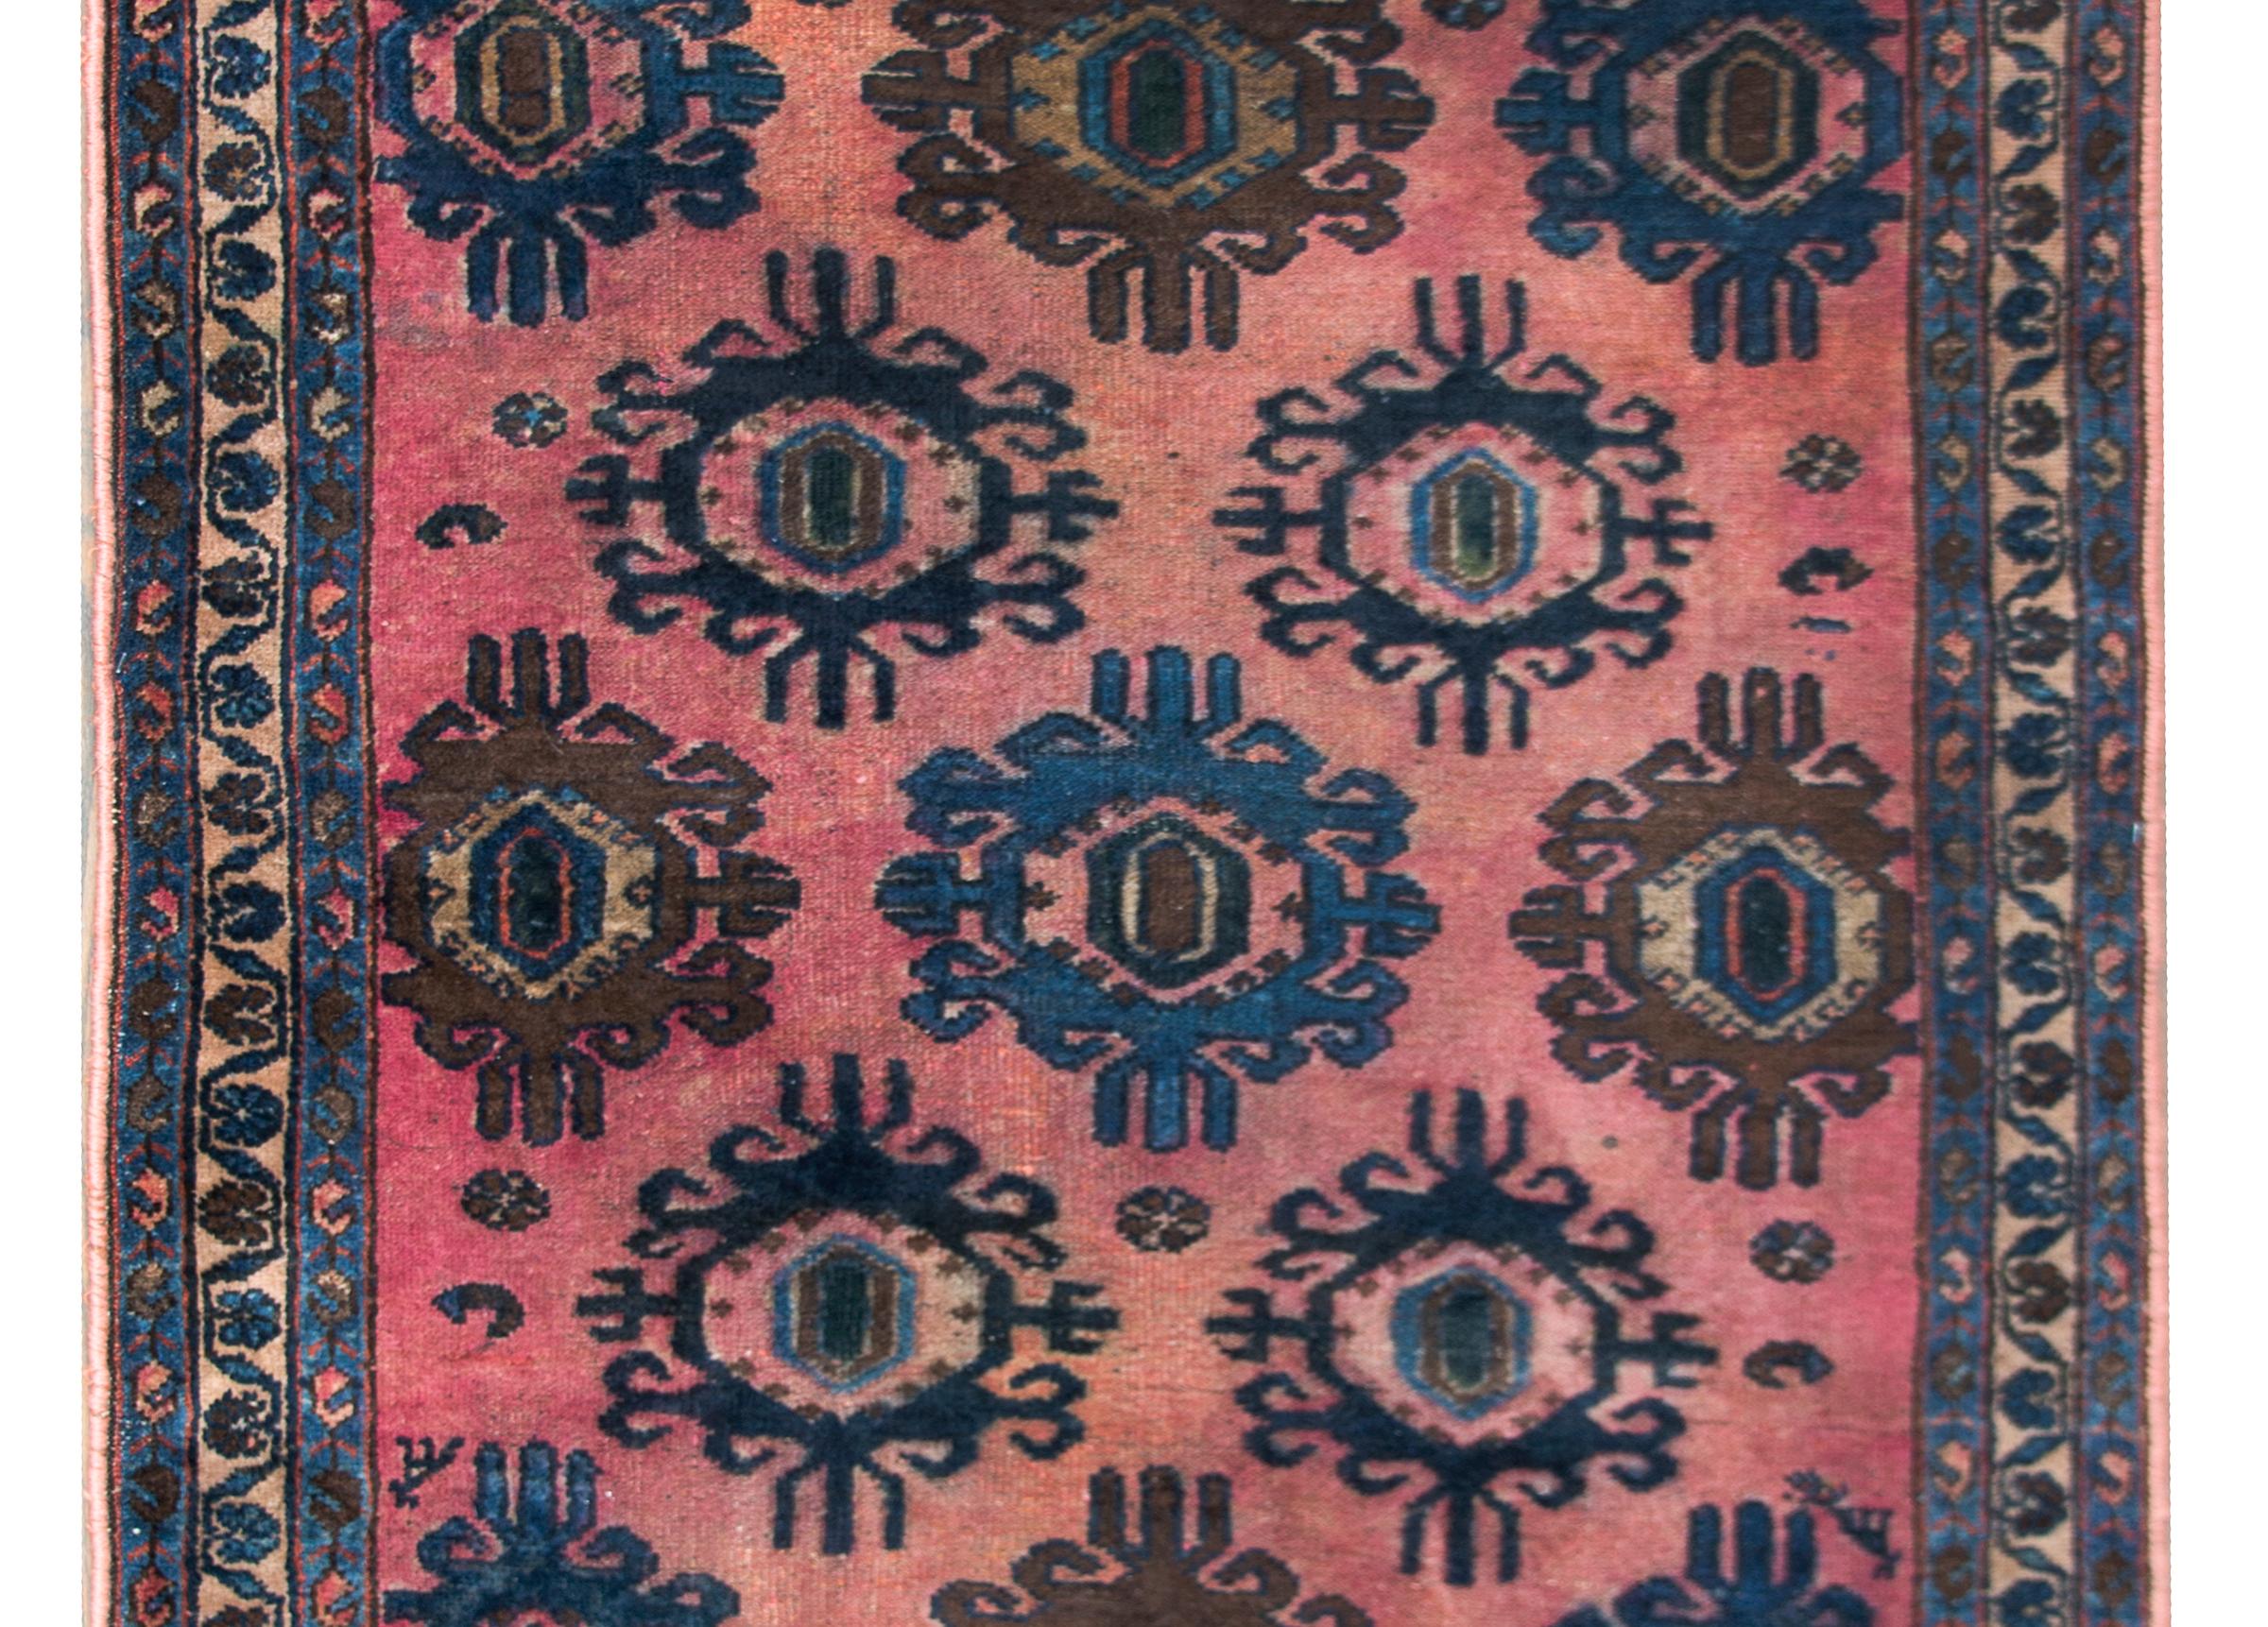 A wonderful early 20th century Persian Lilihan rug with an unusual repeated large-scale stylized floral medallions woven in light and dark indigo, brown, and pink set against an abrash pink background. The border is simple, with three thin stripes